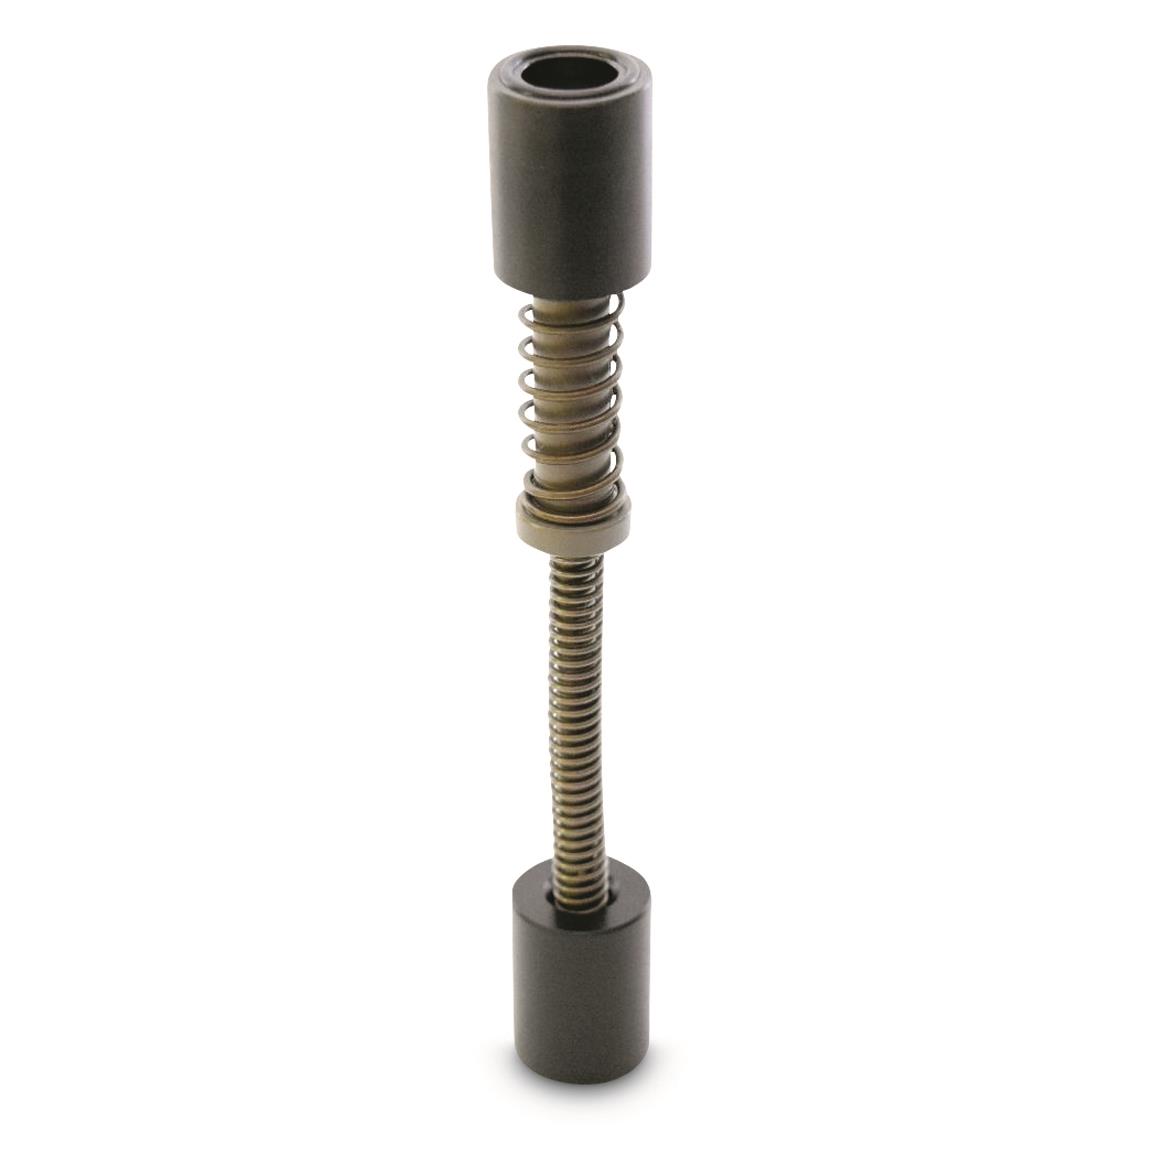 Armaspec Stealth Recoil Spring for AR-15 Rifles